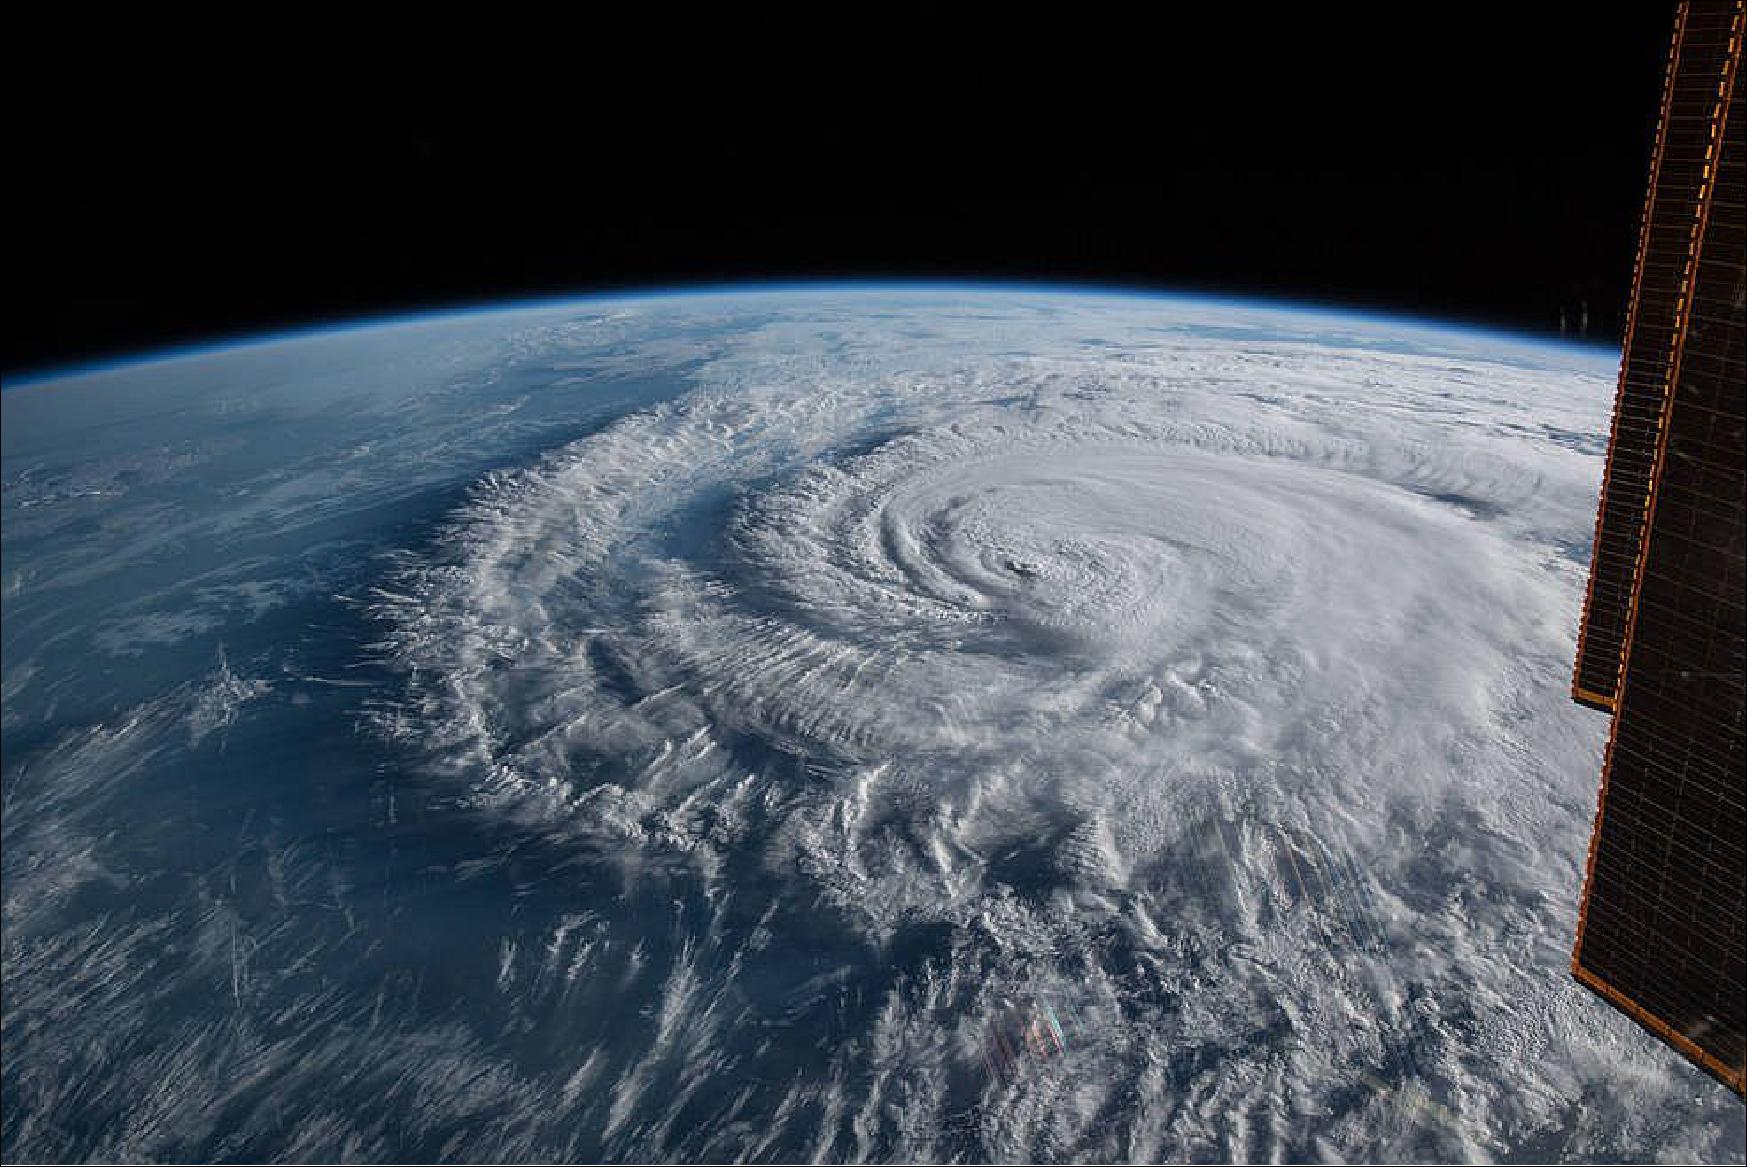 Figure 74: Hurricane Florence is pictured from the International Space Station as a category 1 storm as it was making landfall near Wrightsville Beach, North Carolina, Sept. 14, 2018 (image credit: NASA)